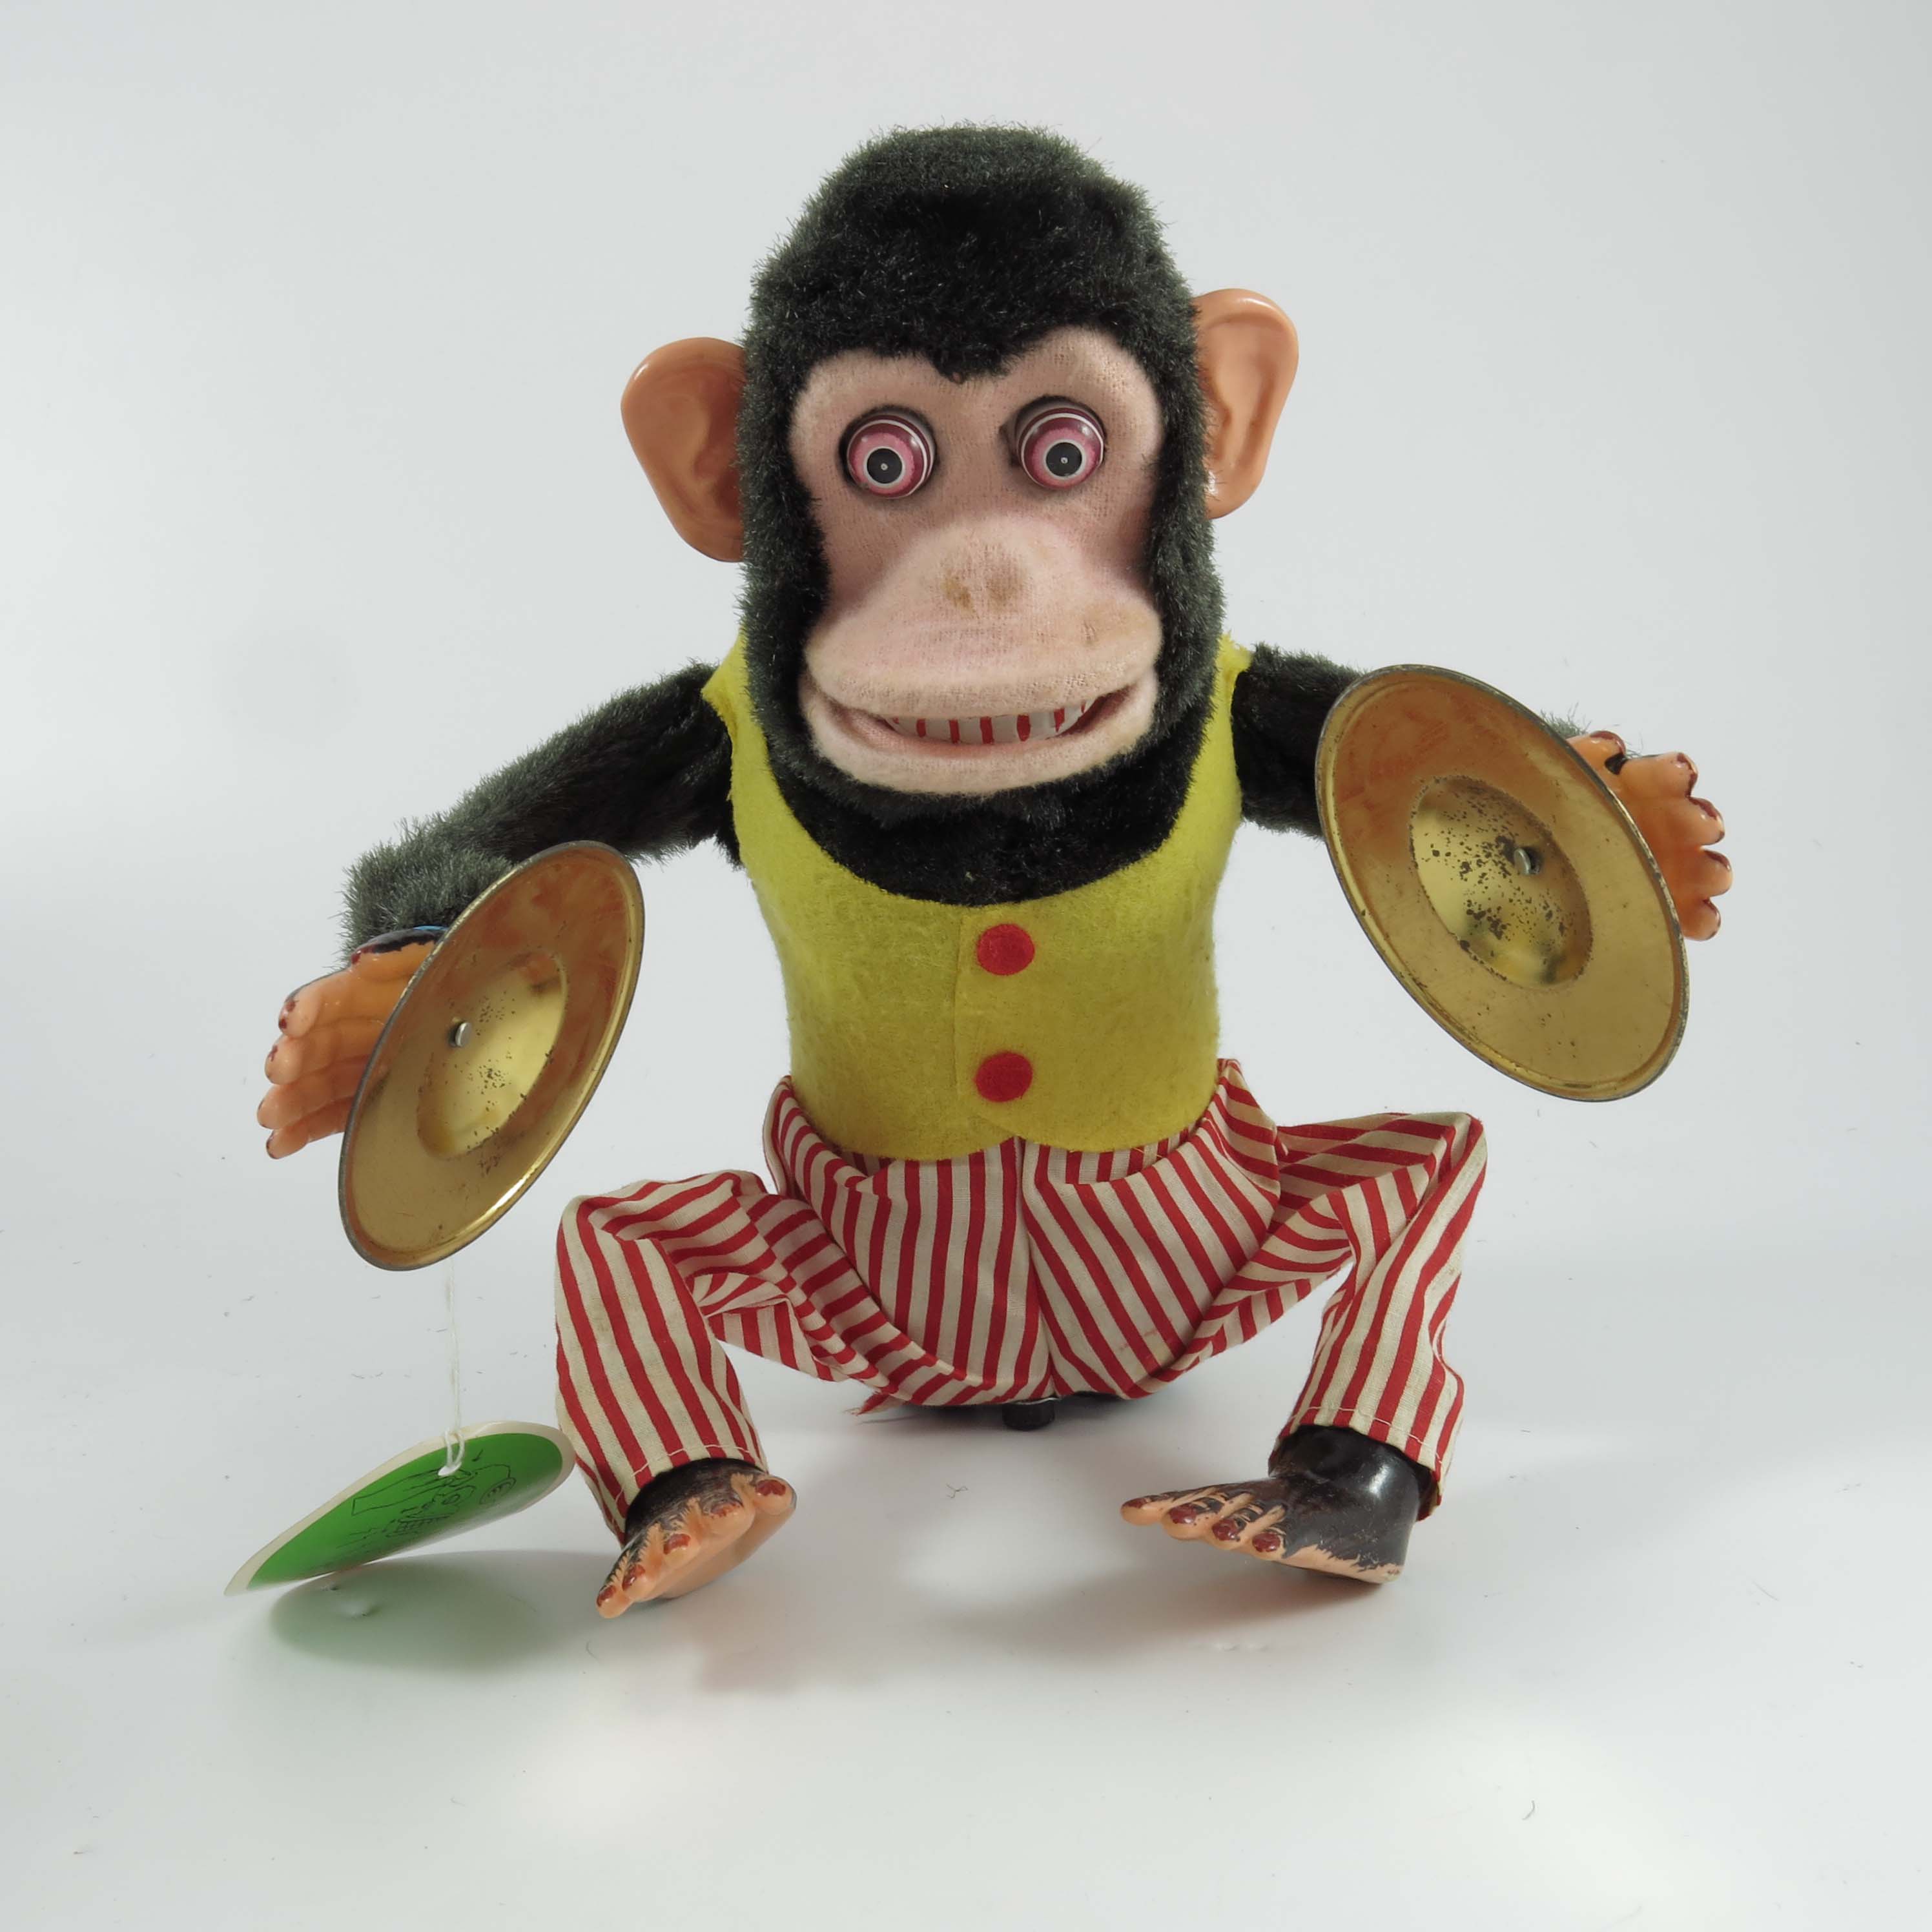 BATTERY OPERATED MUSICAL 'JOLLY CHIMP' IN BOX BY DASHIN, JAPAN AND ELEPHANT IN BOX BY MAMBO ALPS, - Image 3 of 6